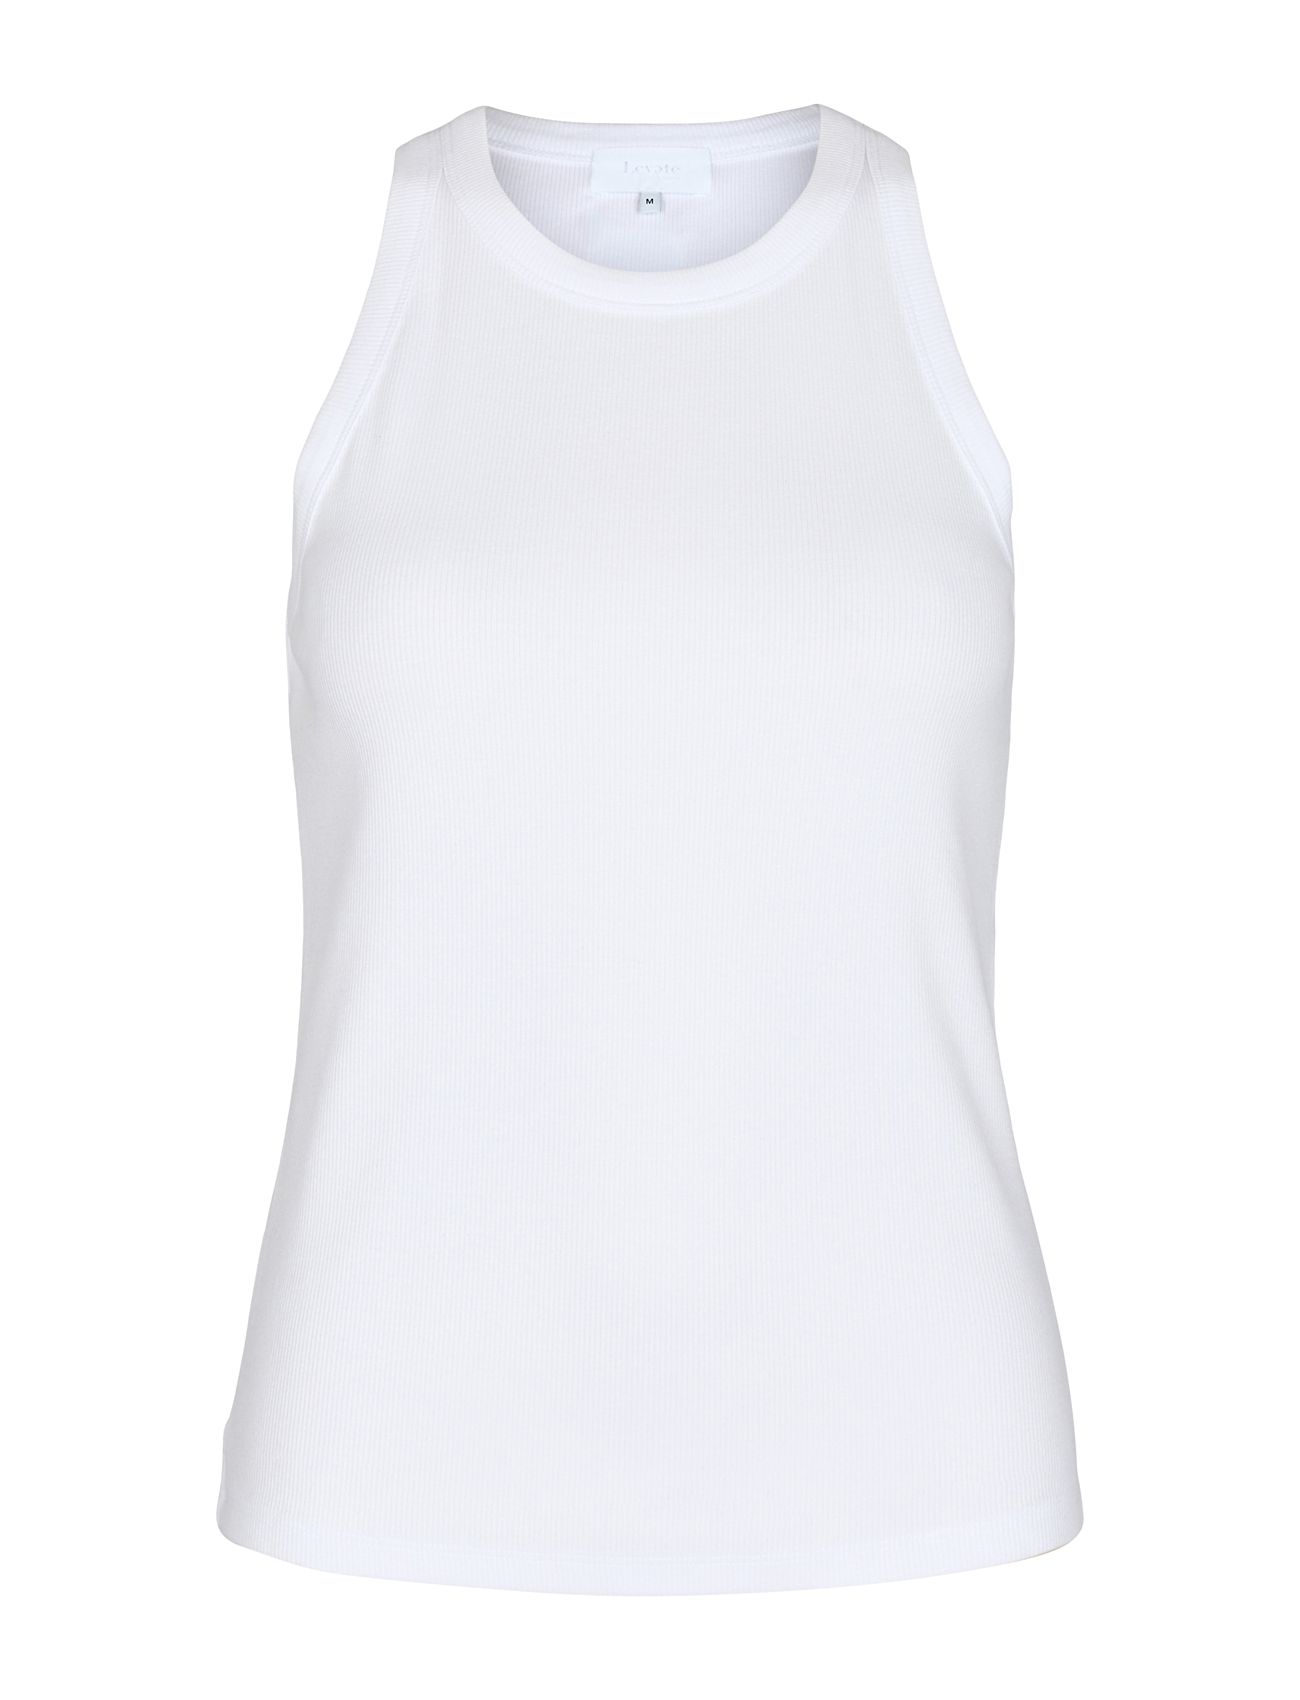 Lr-Numbia Tops T-shirts & Tops Sleeveless White Levete Room